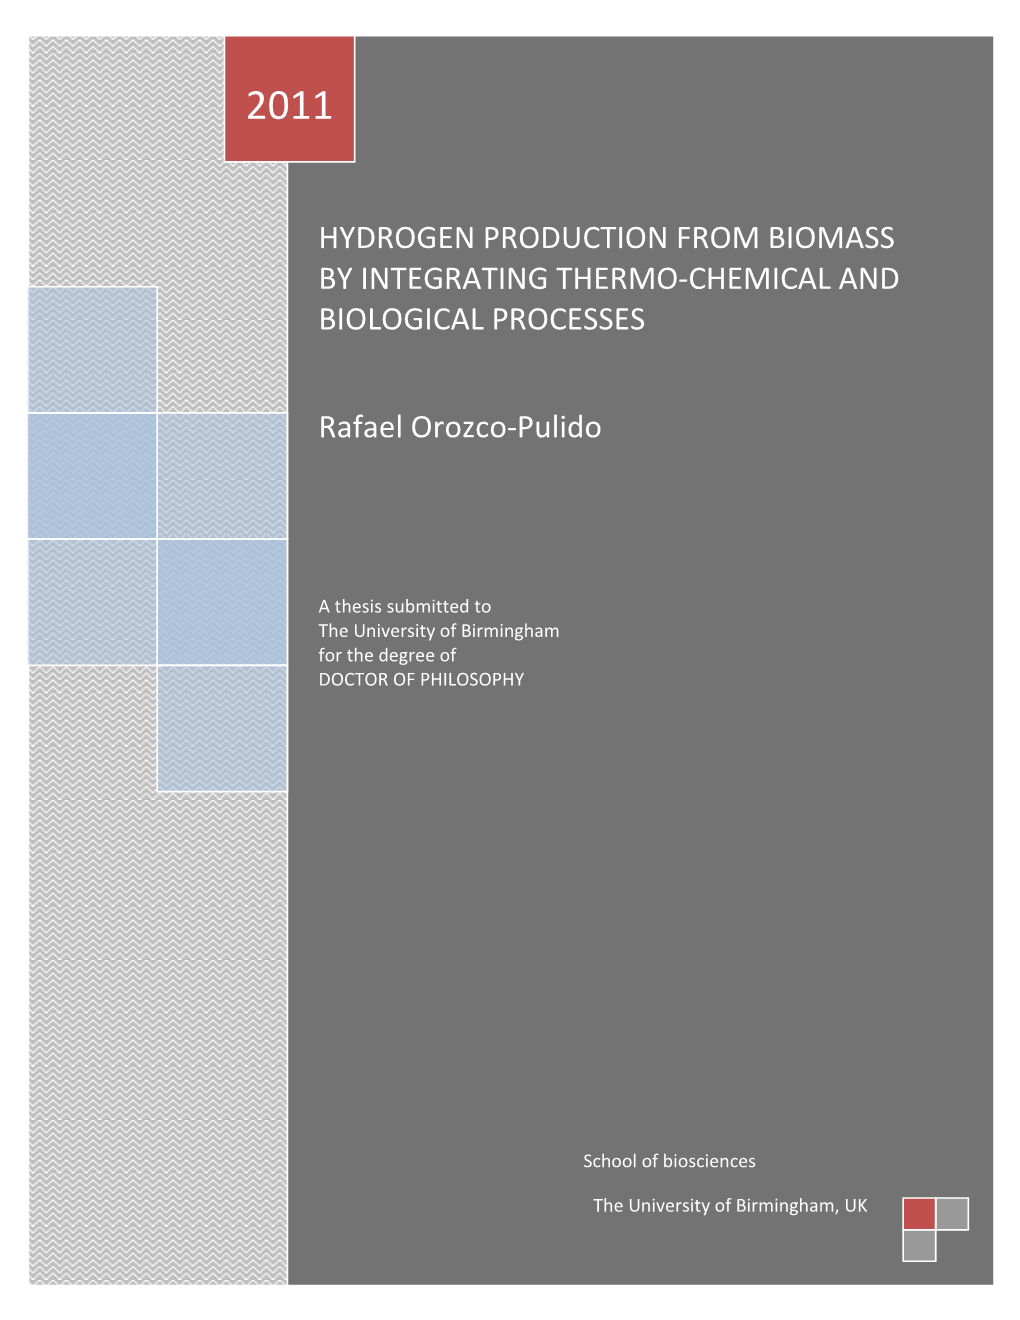 Hydrogen Production from Biomass by Integrating Thermo-Chemical and Biological Processes